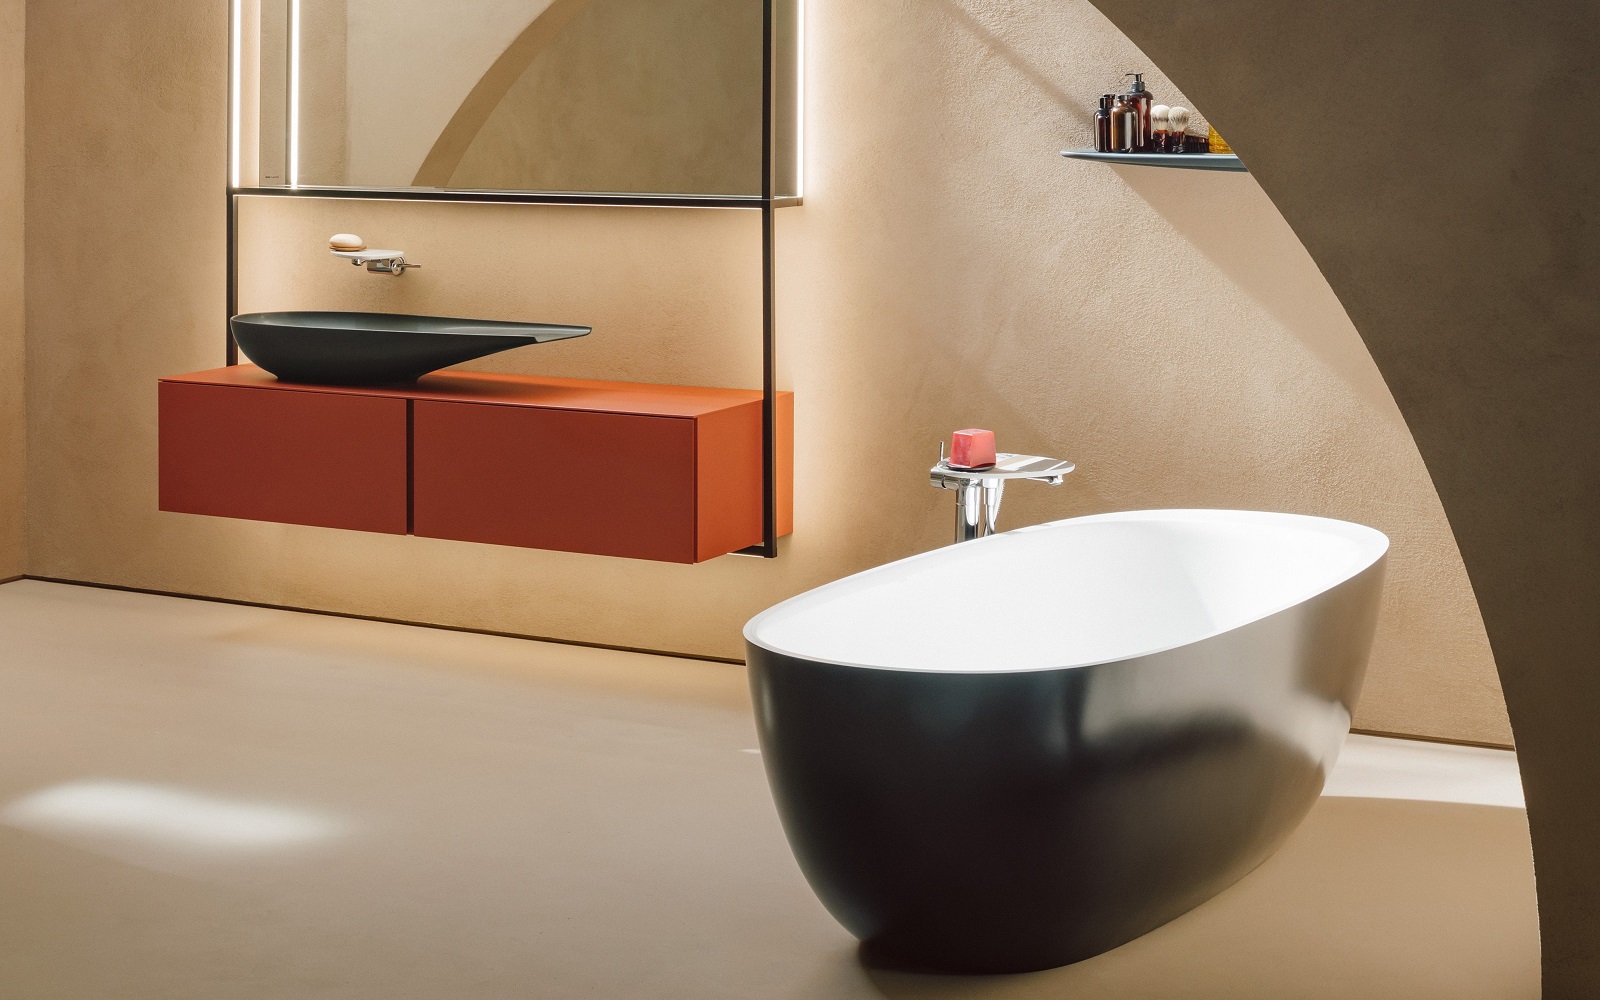 rendered image of Laufen_Ilbagnoalessi_collection with black bath and orange furniture